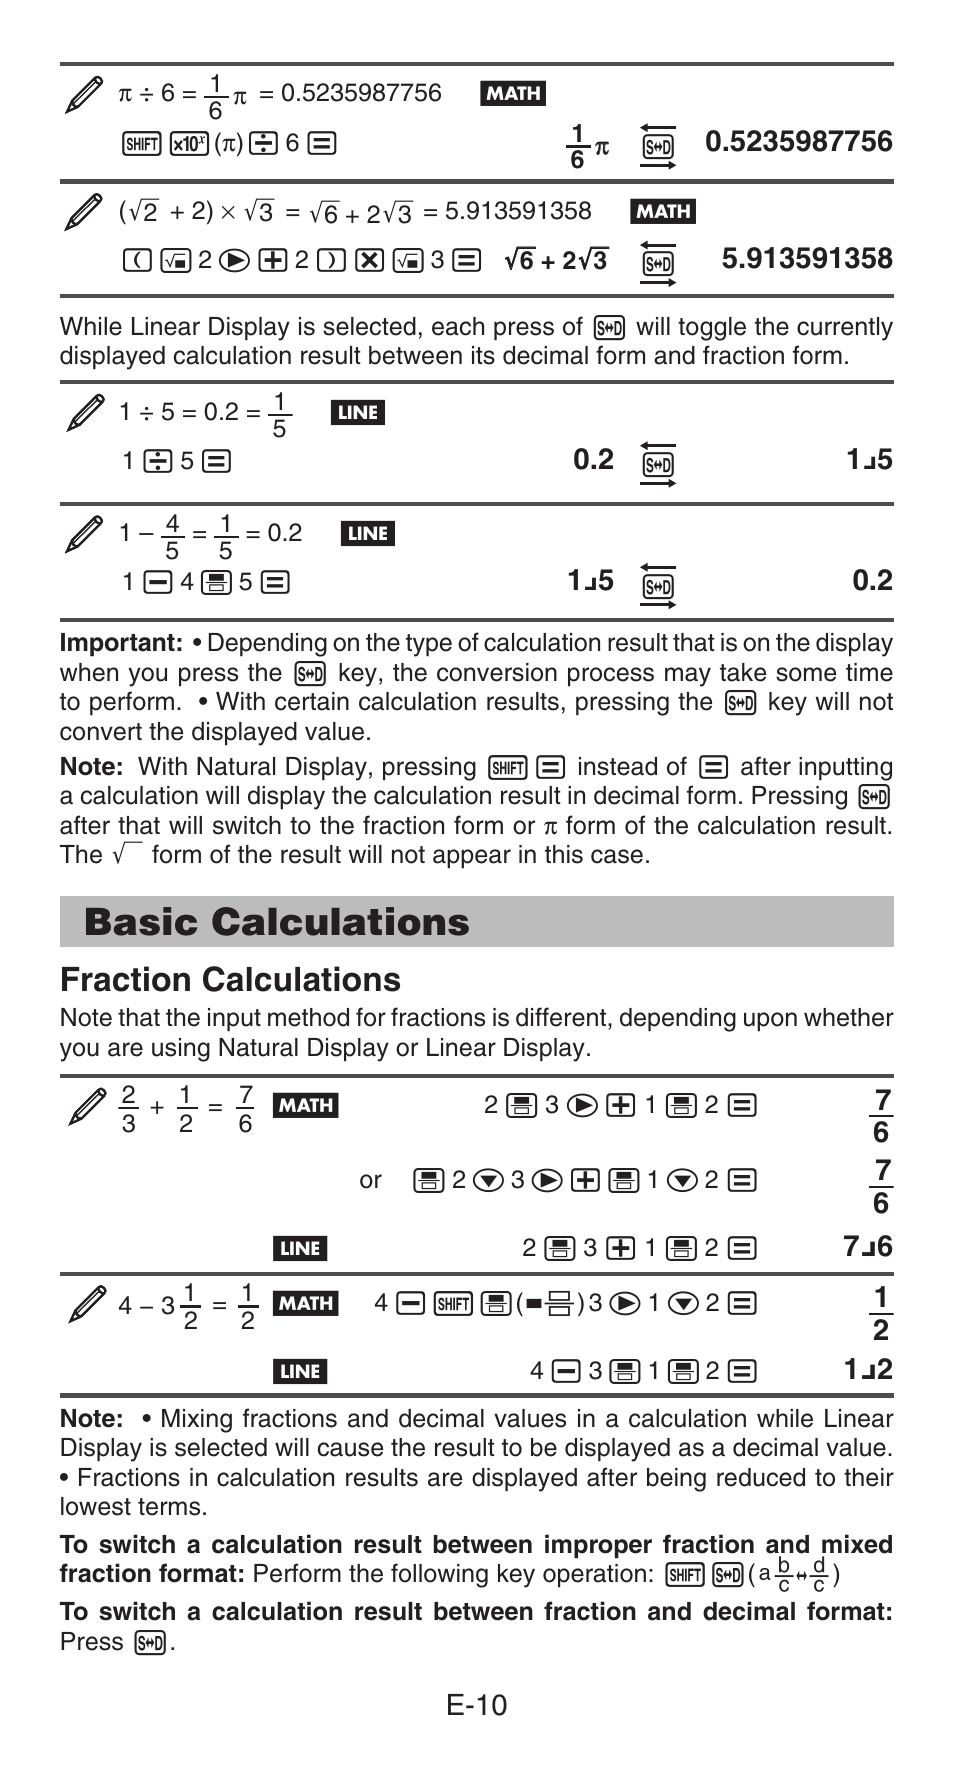 Basic calculations, Fraction calculations | Casio fx-991ES PLUS User Manual  | Page 11 / 46